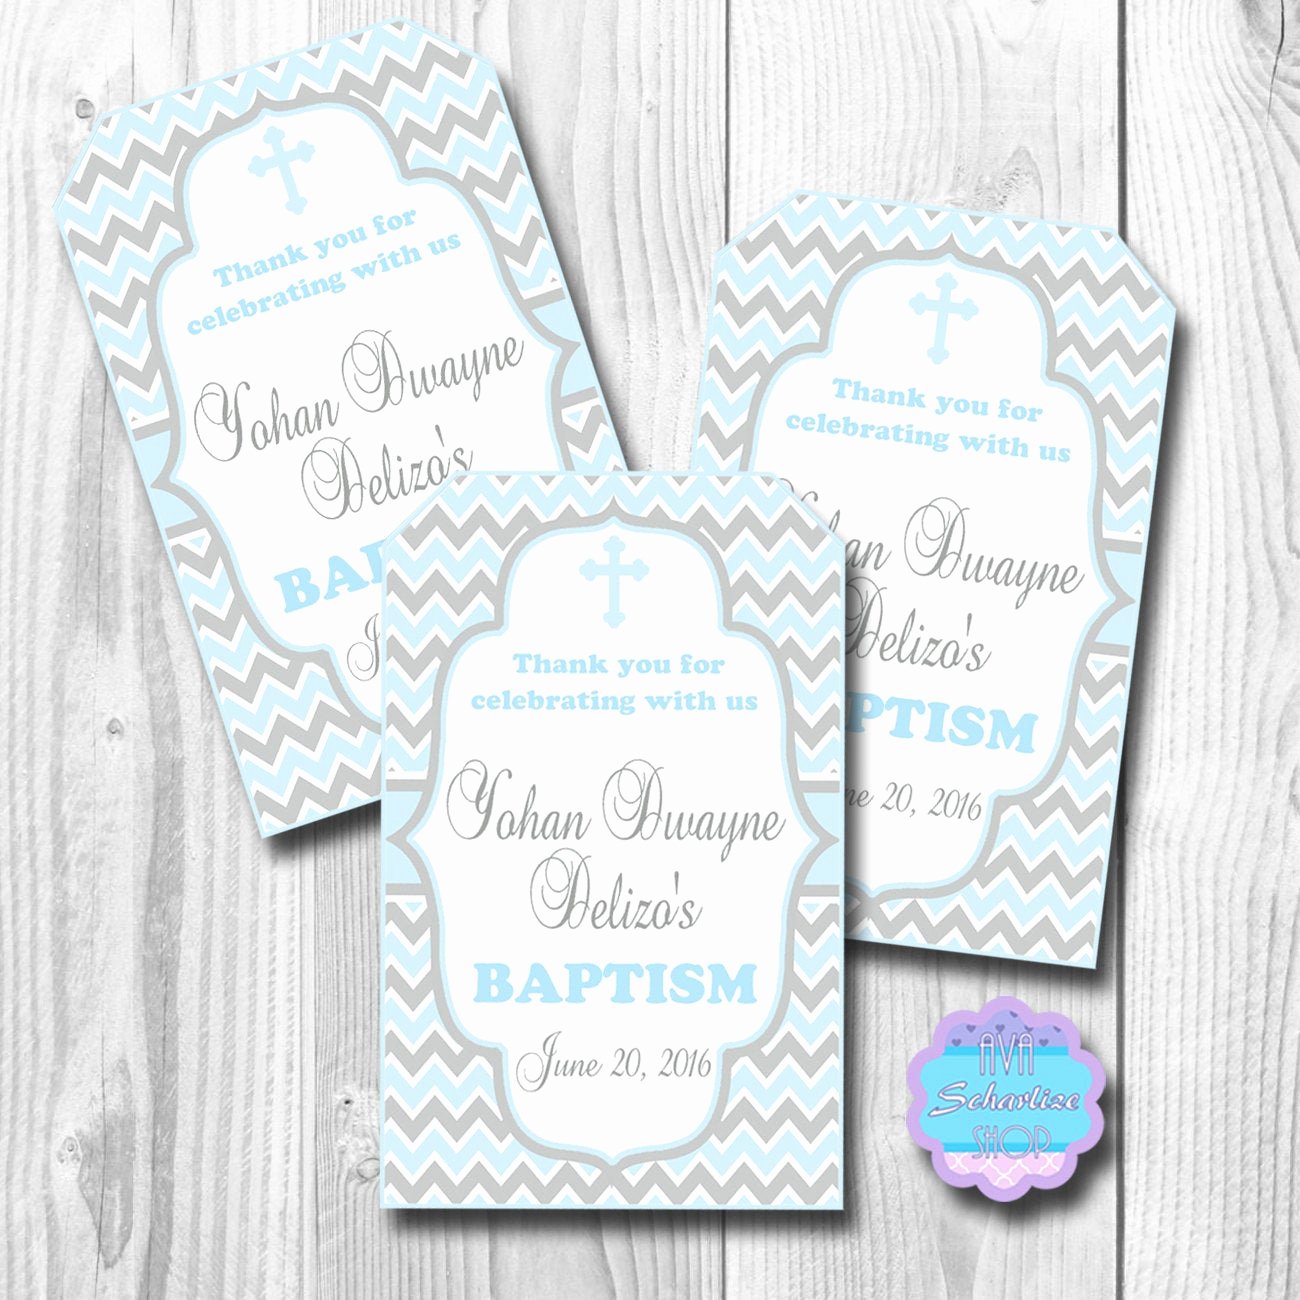 Baptism Thank You Tags Best Of Christening Favor Tags Baptism Baptismal Thank You Tags